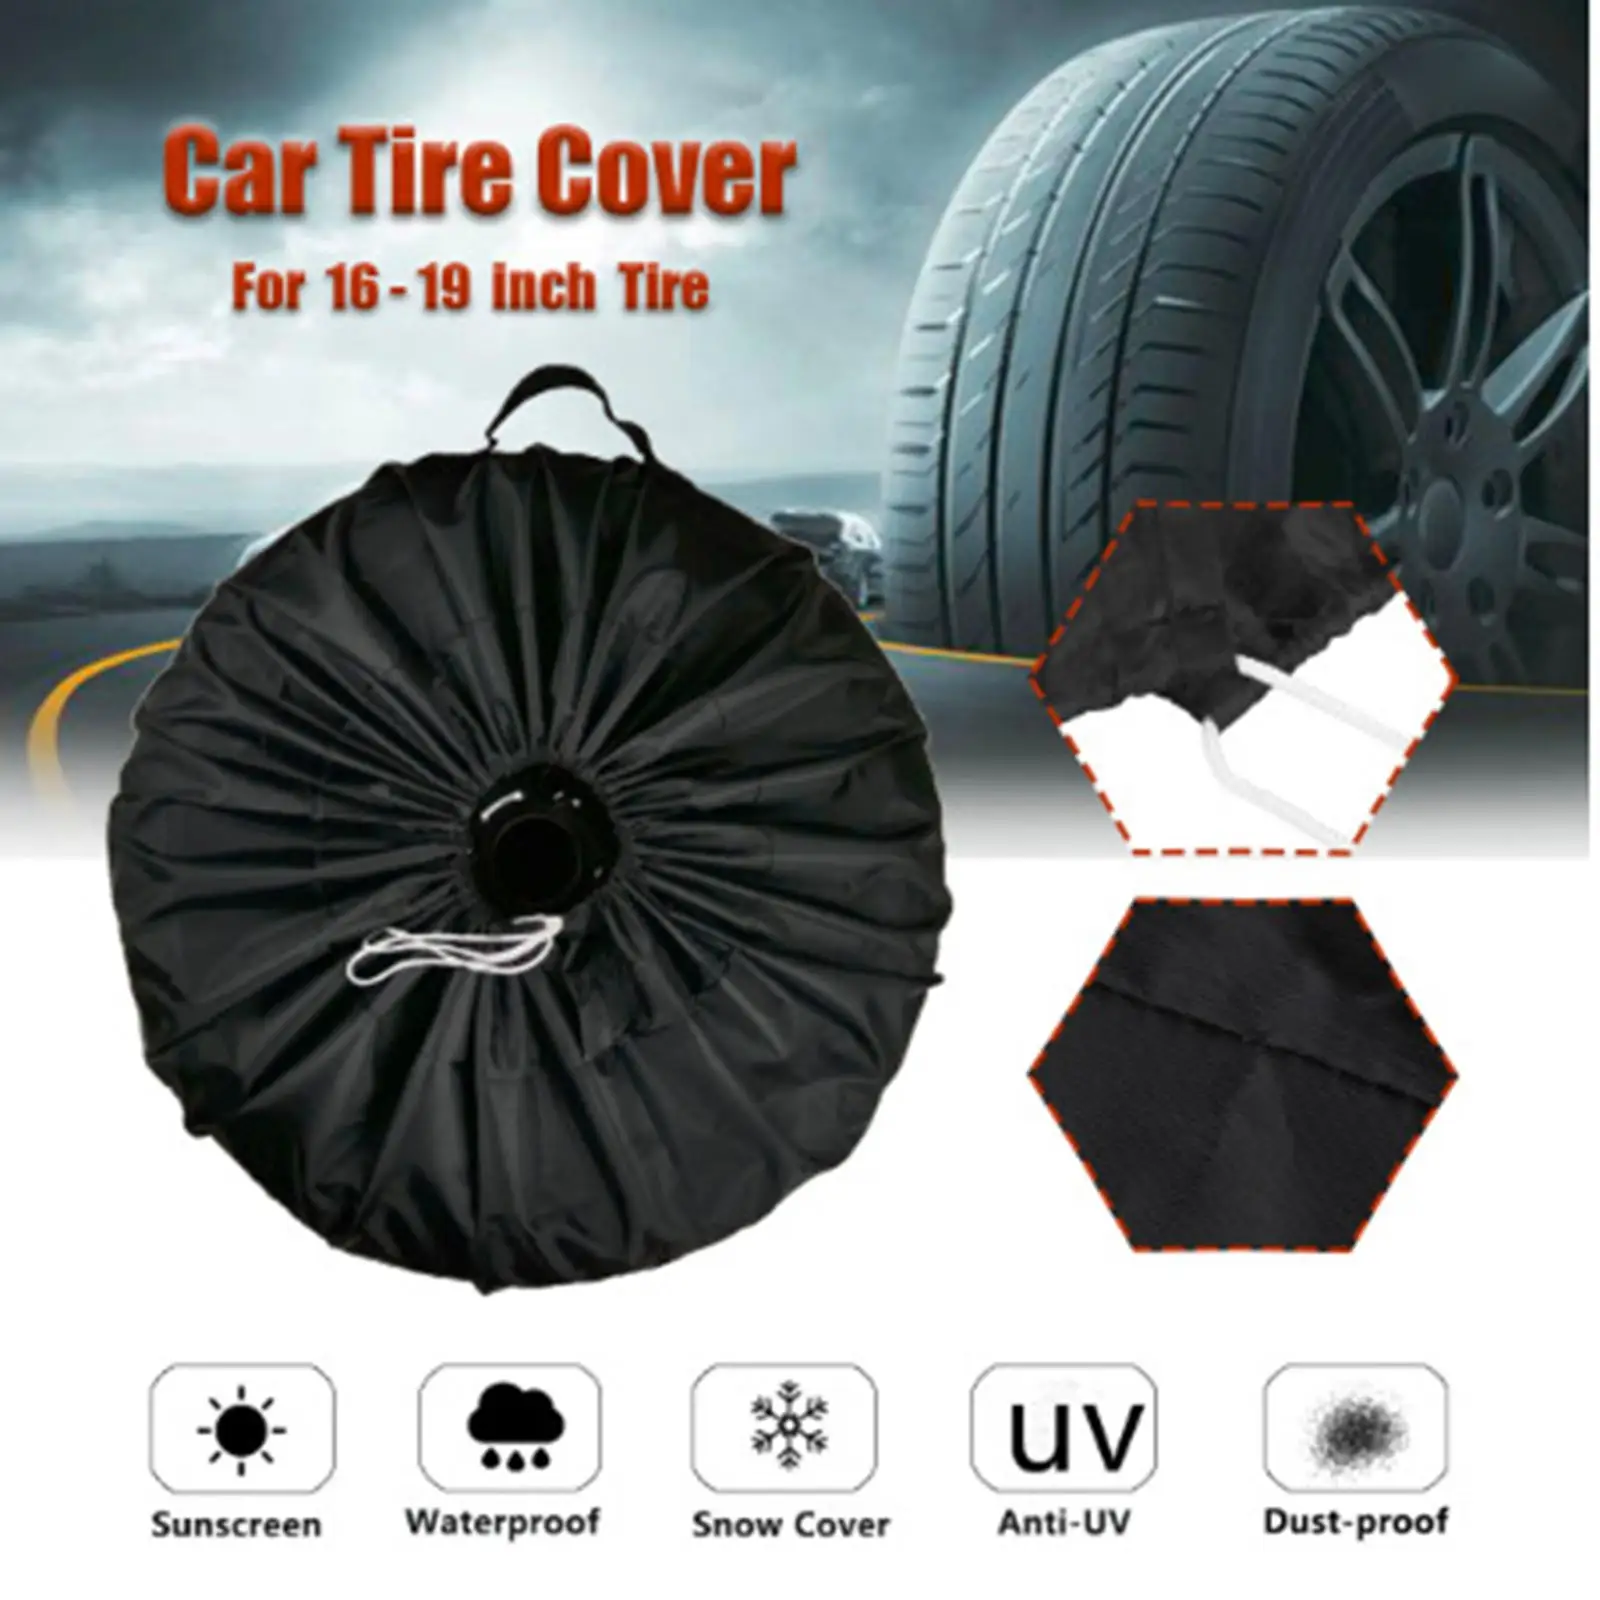 Tyre Cover Camper Oxford Waterproof 0 Tyre Fit for SUV RV Car